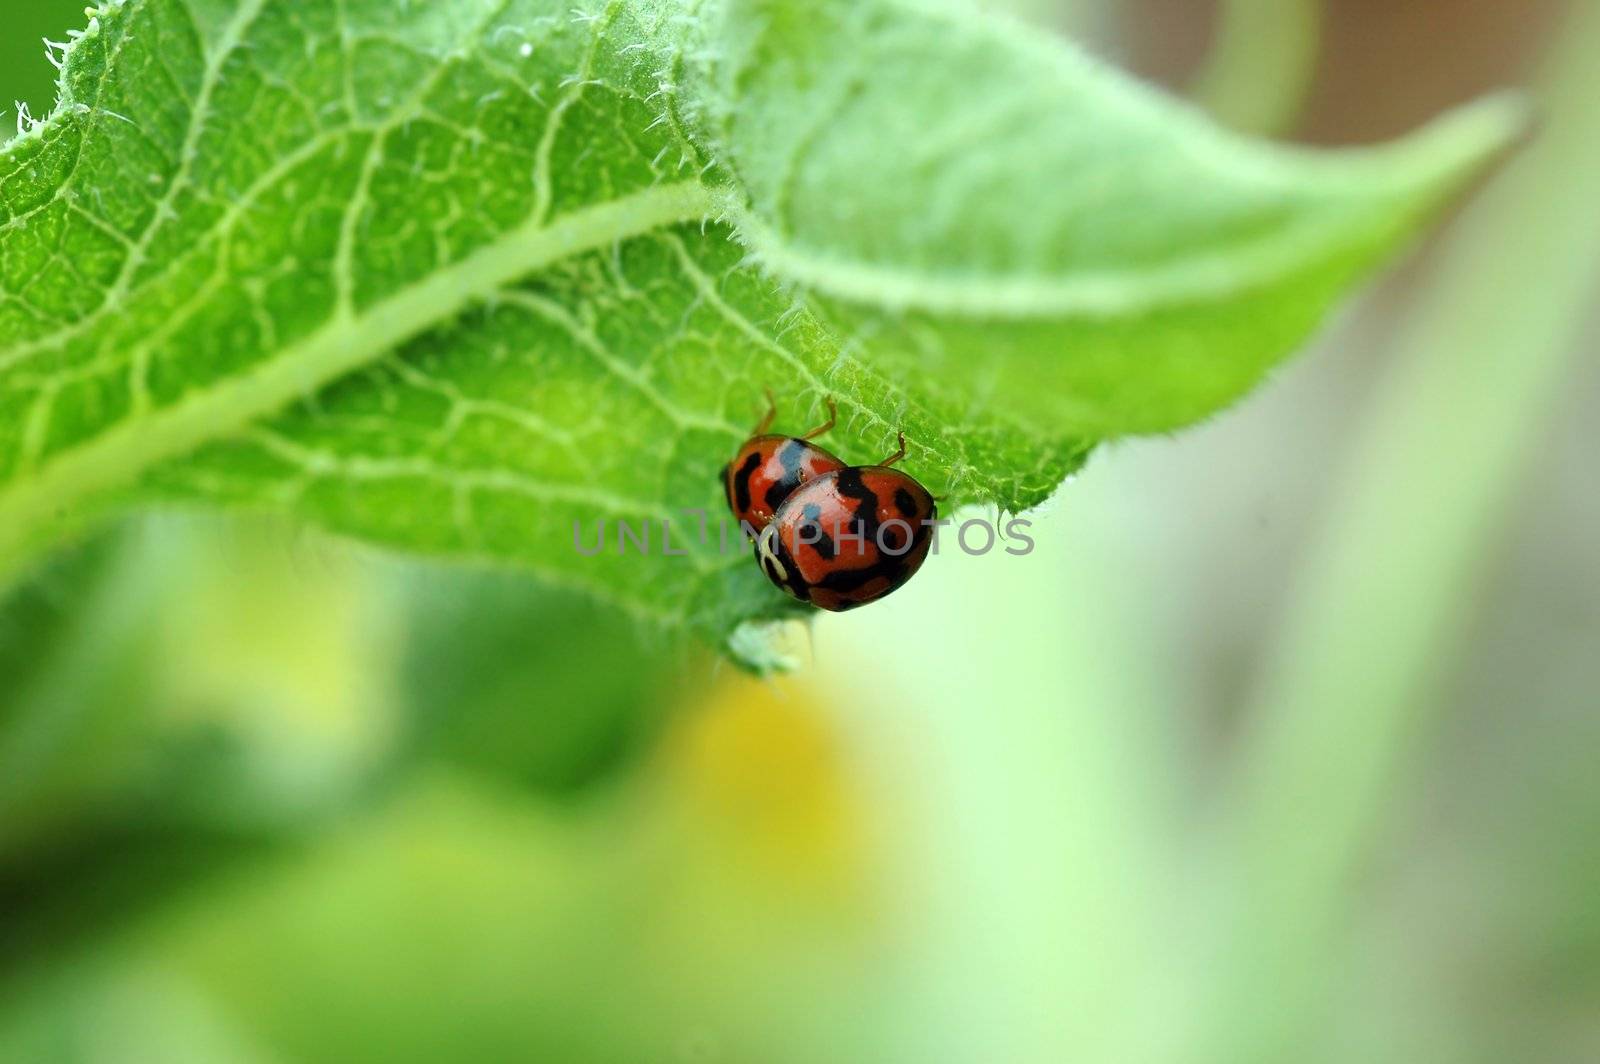 Two spotted ladybirds mating on green leaf